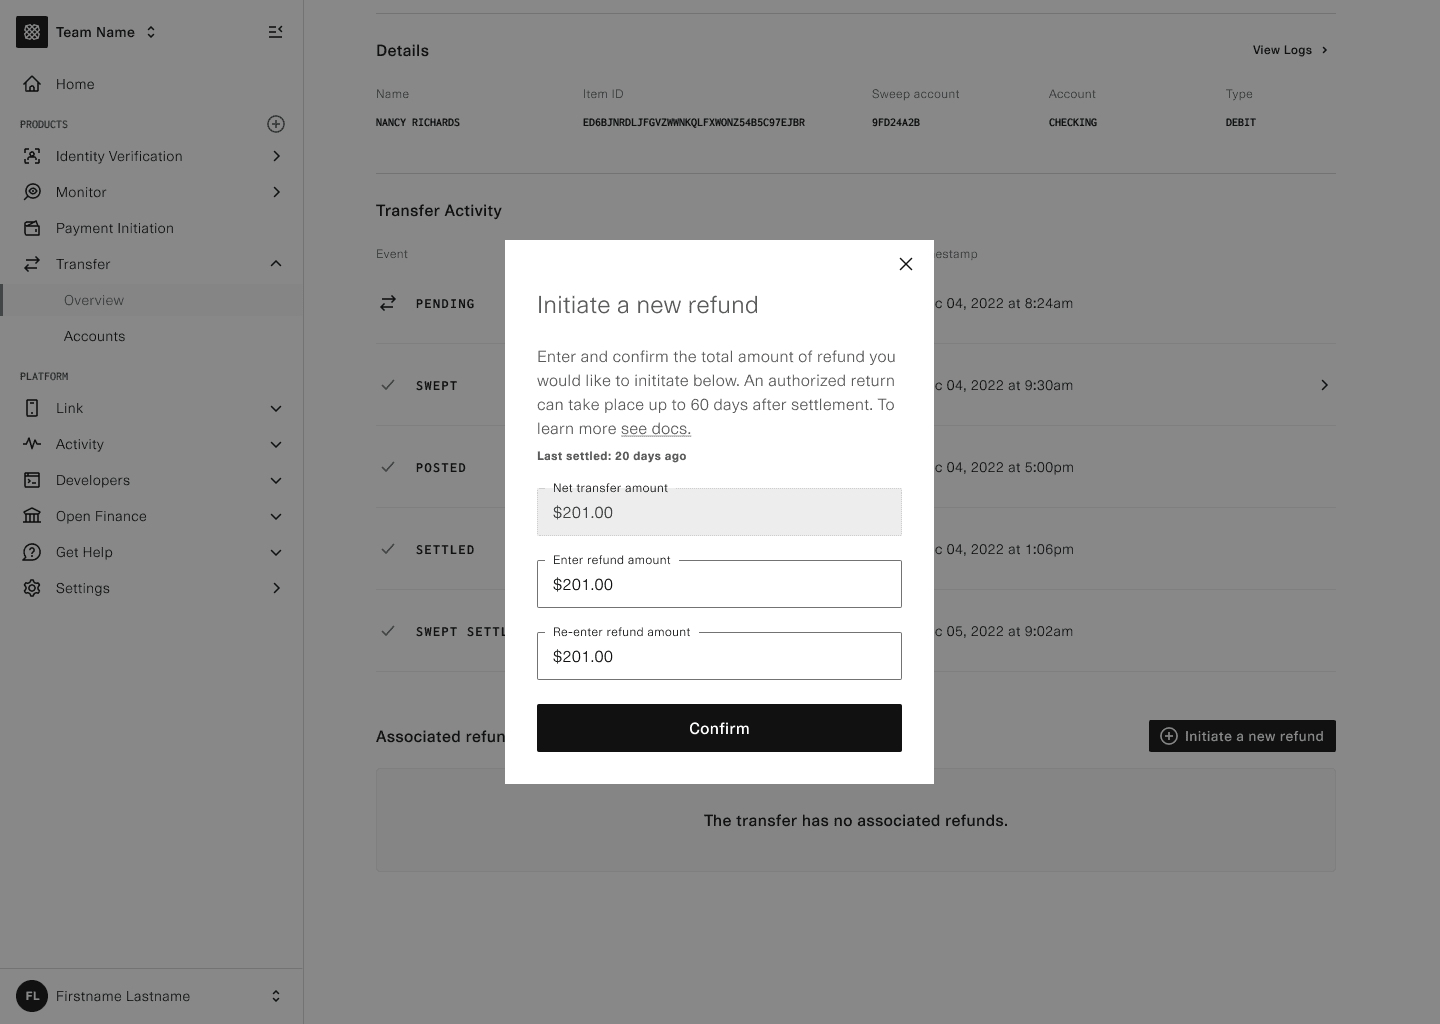 Image of Plaid Dashboard UI to initiate a refund.